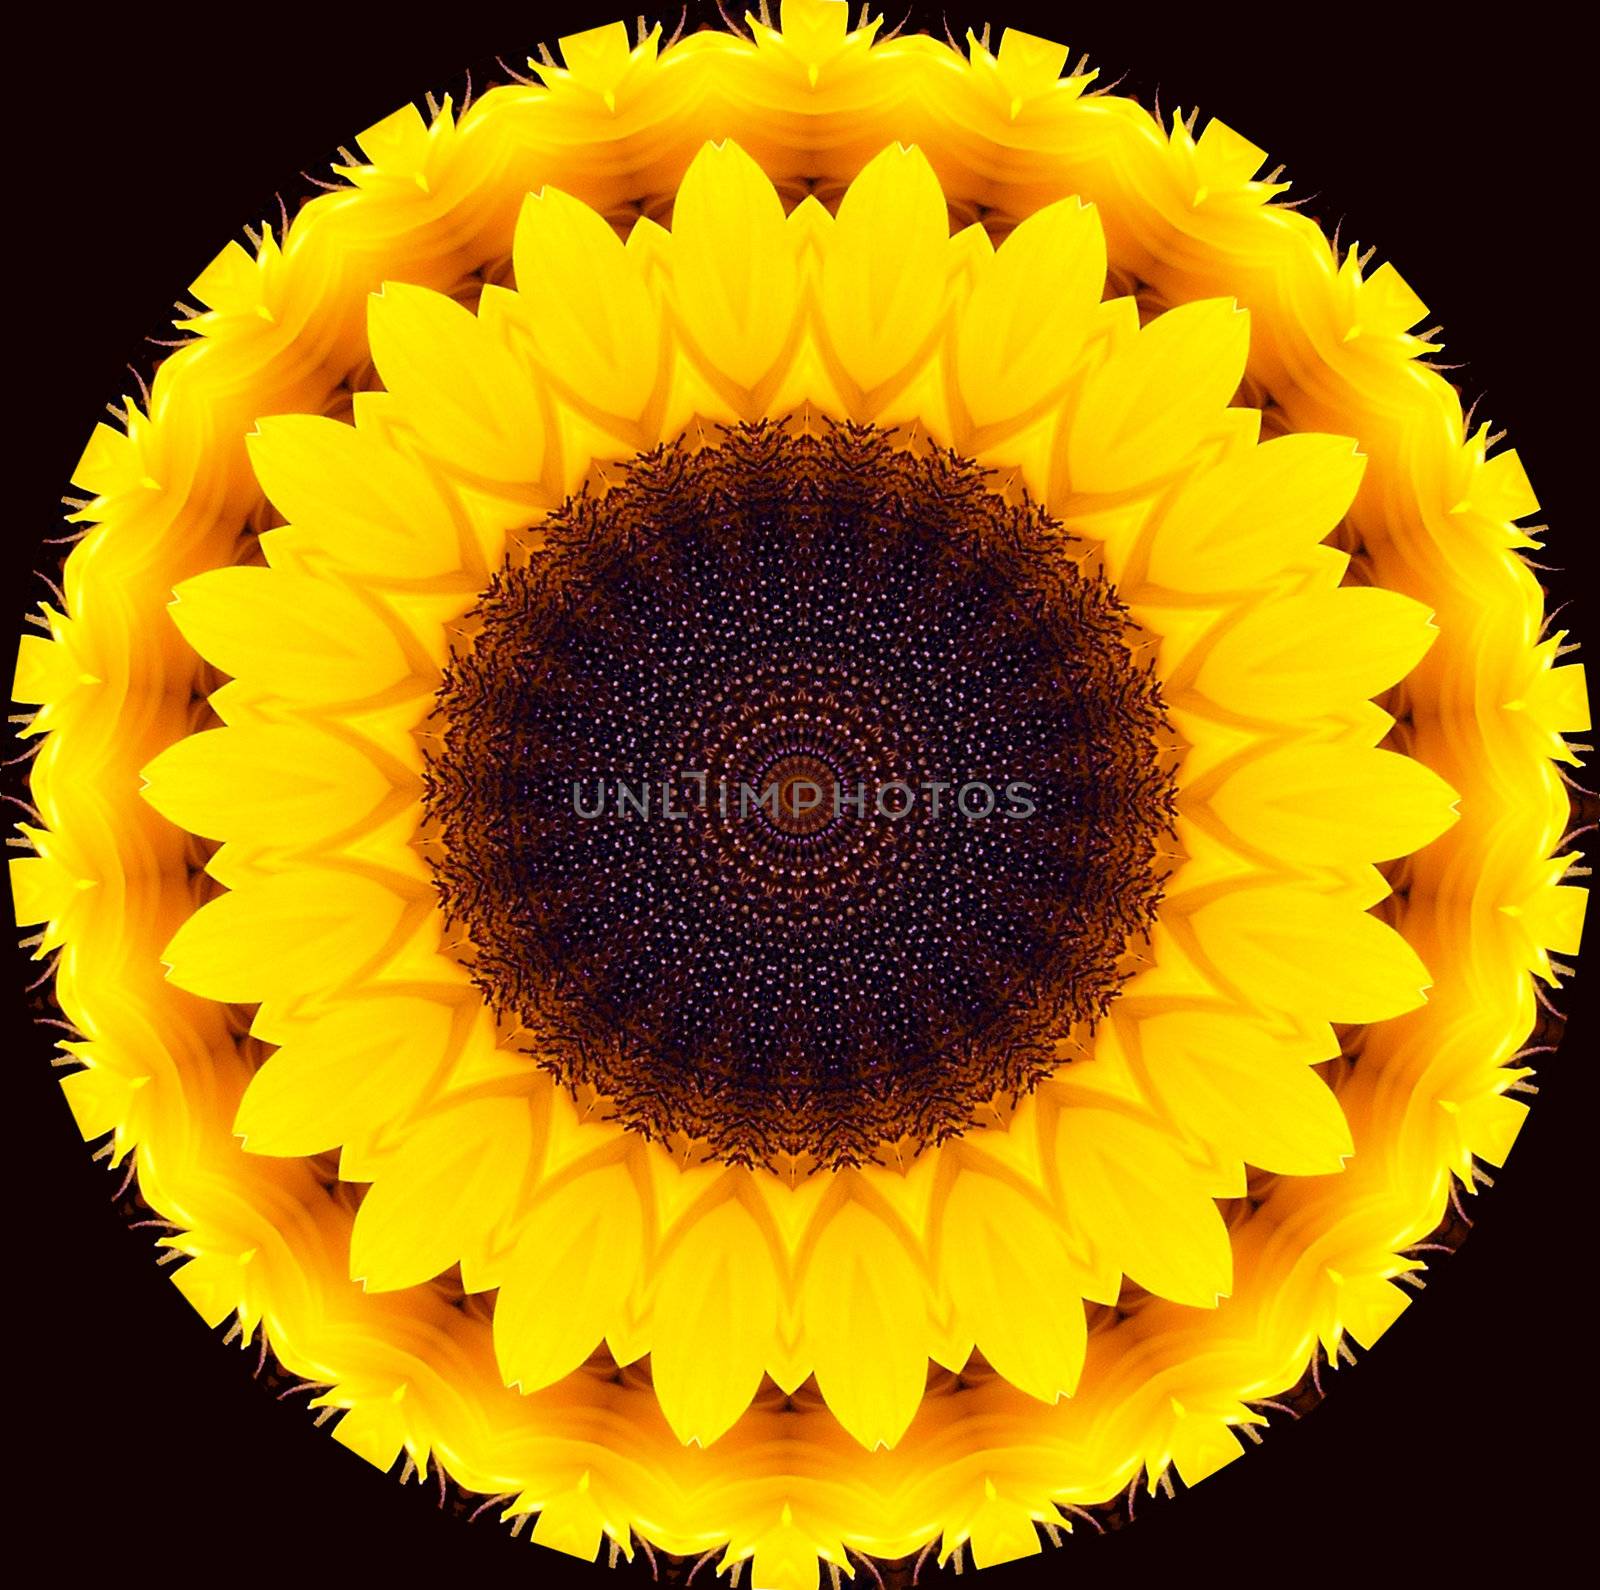 abstract illustration using sunflower elements and colors